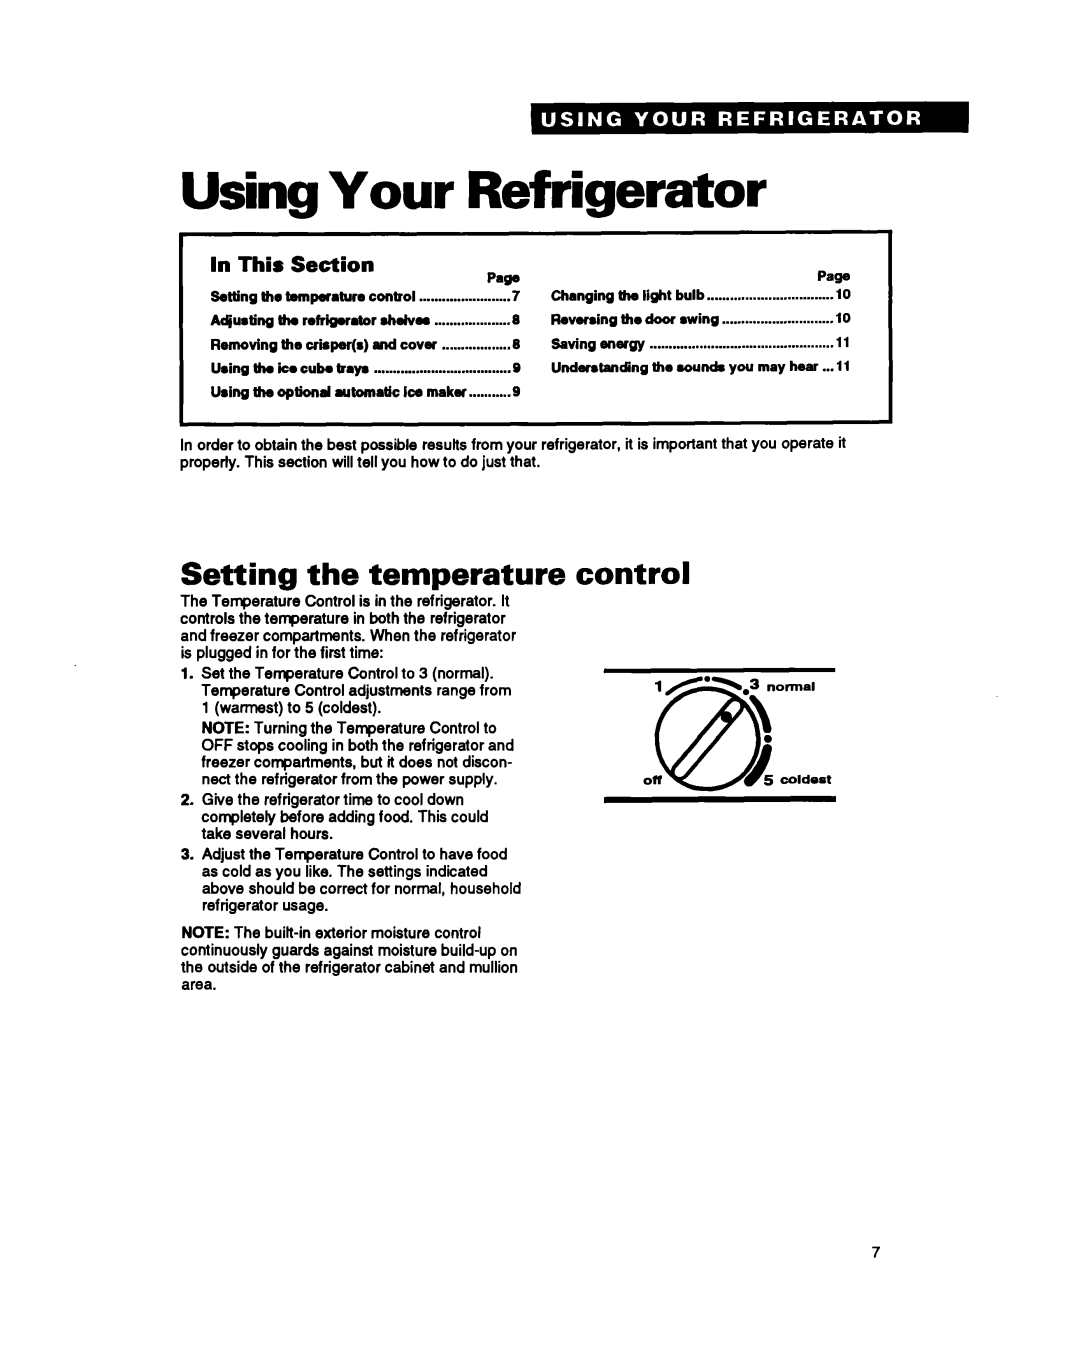 Estate LT14EK, TT14CK Using Your Refrigerator, Setting the temperature control, In This, Section, Page 